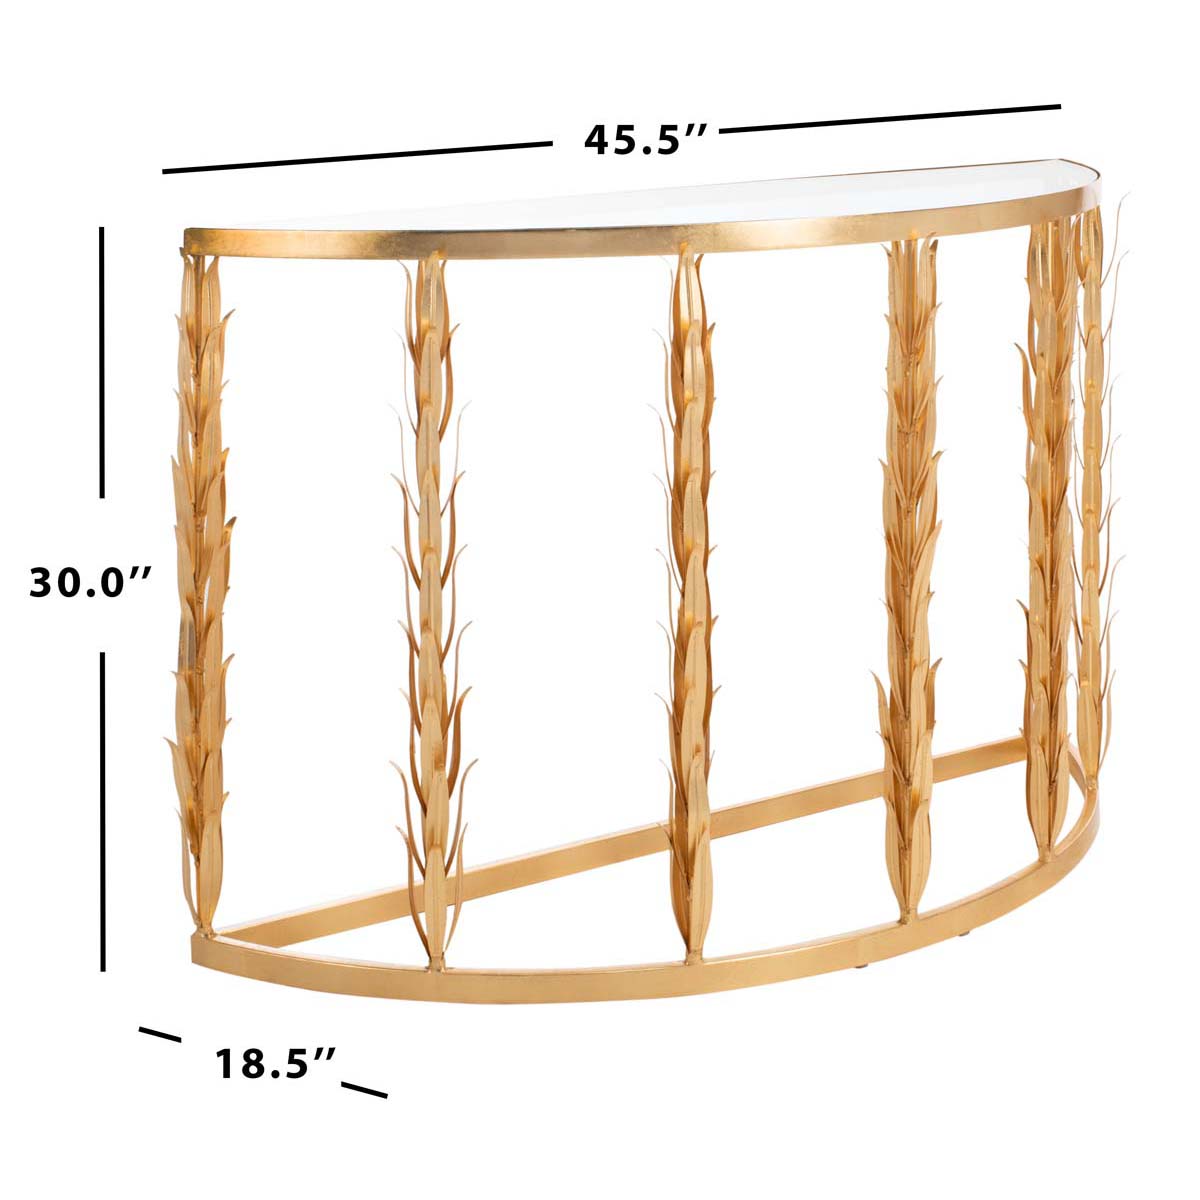 Safavieh Couture Zack Gold Leaf Console Table - Gold